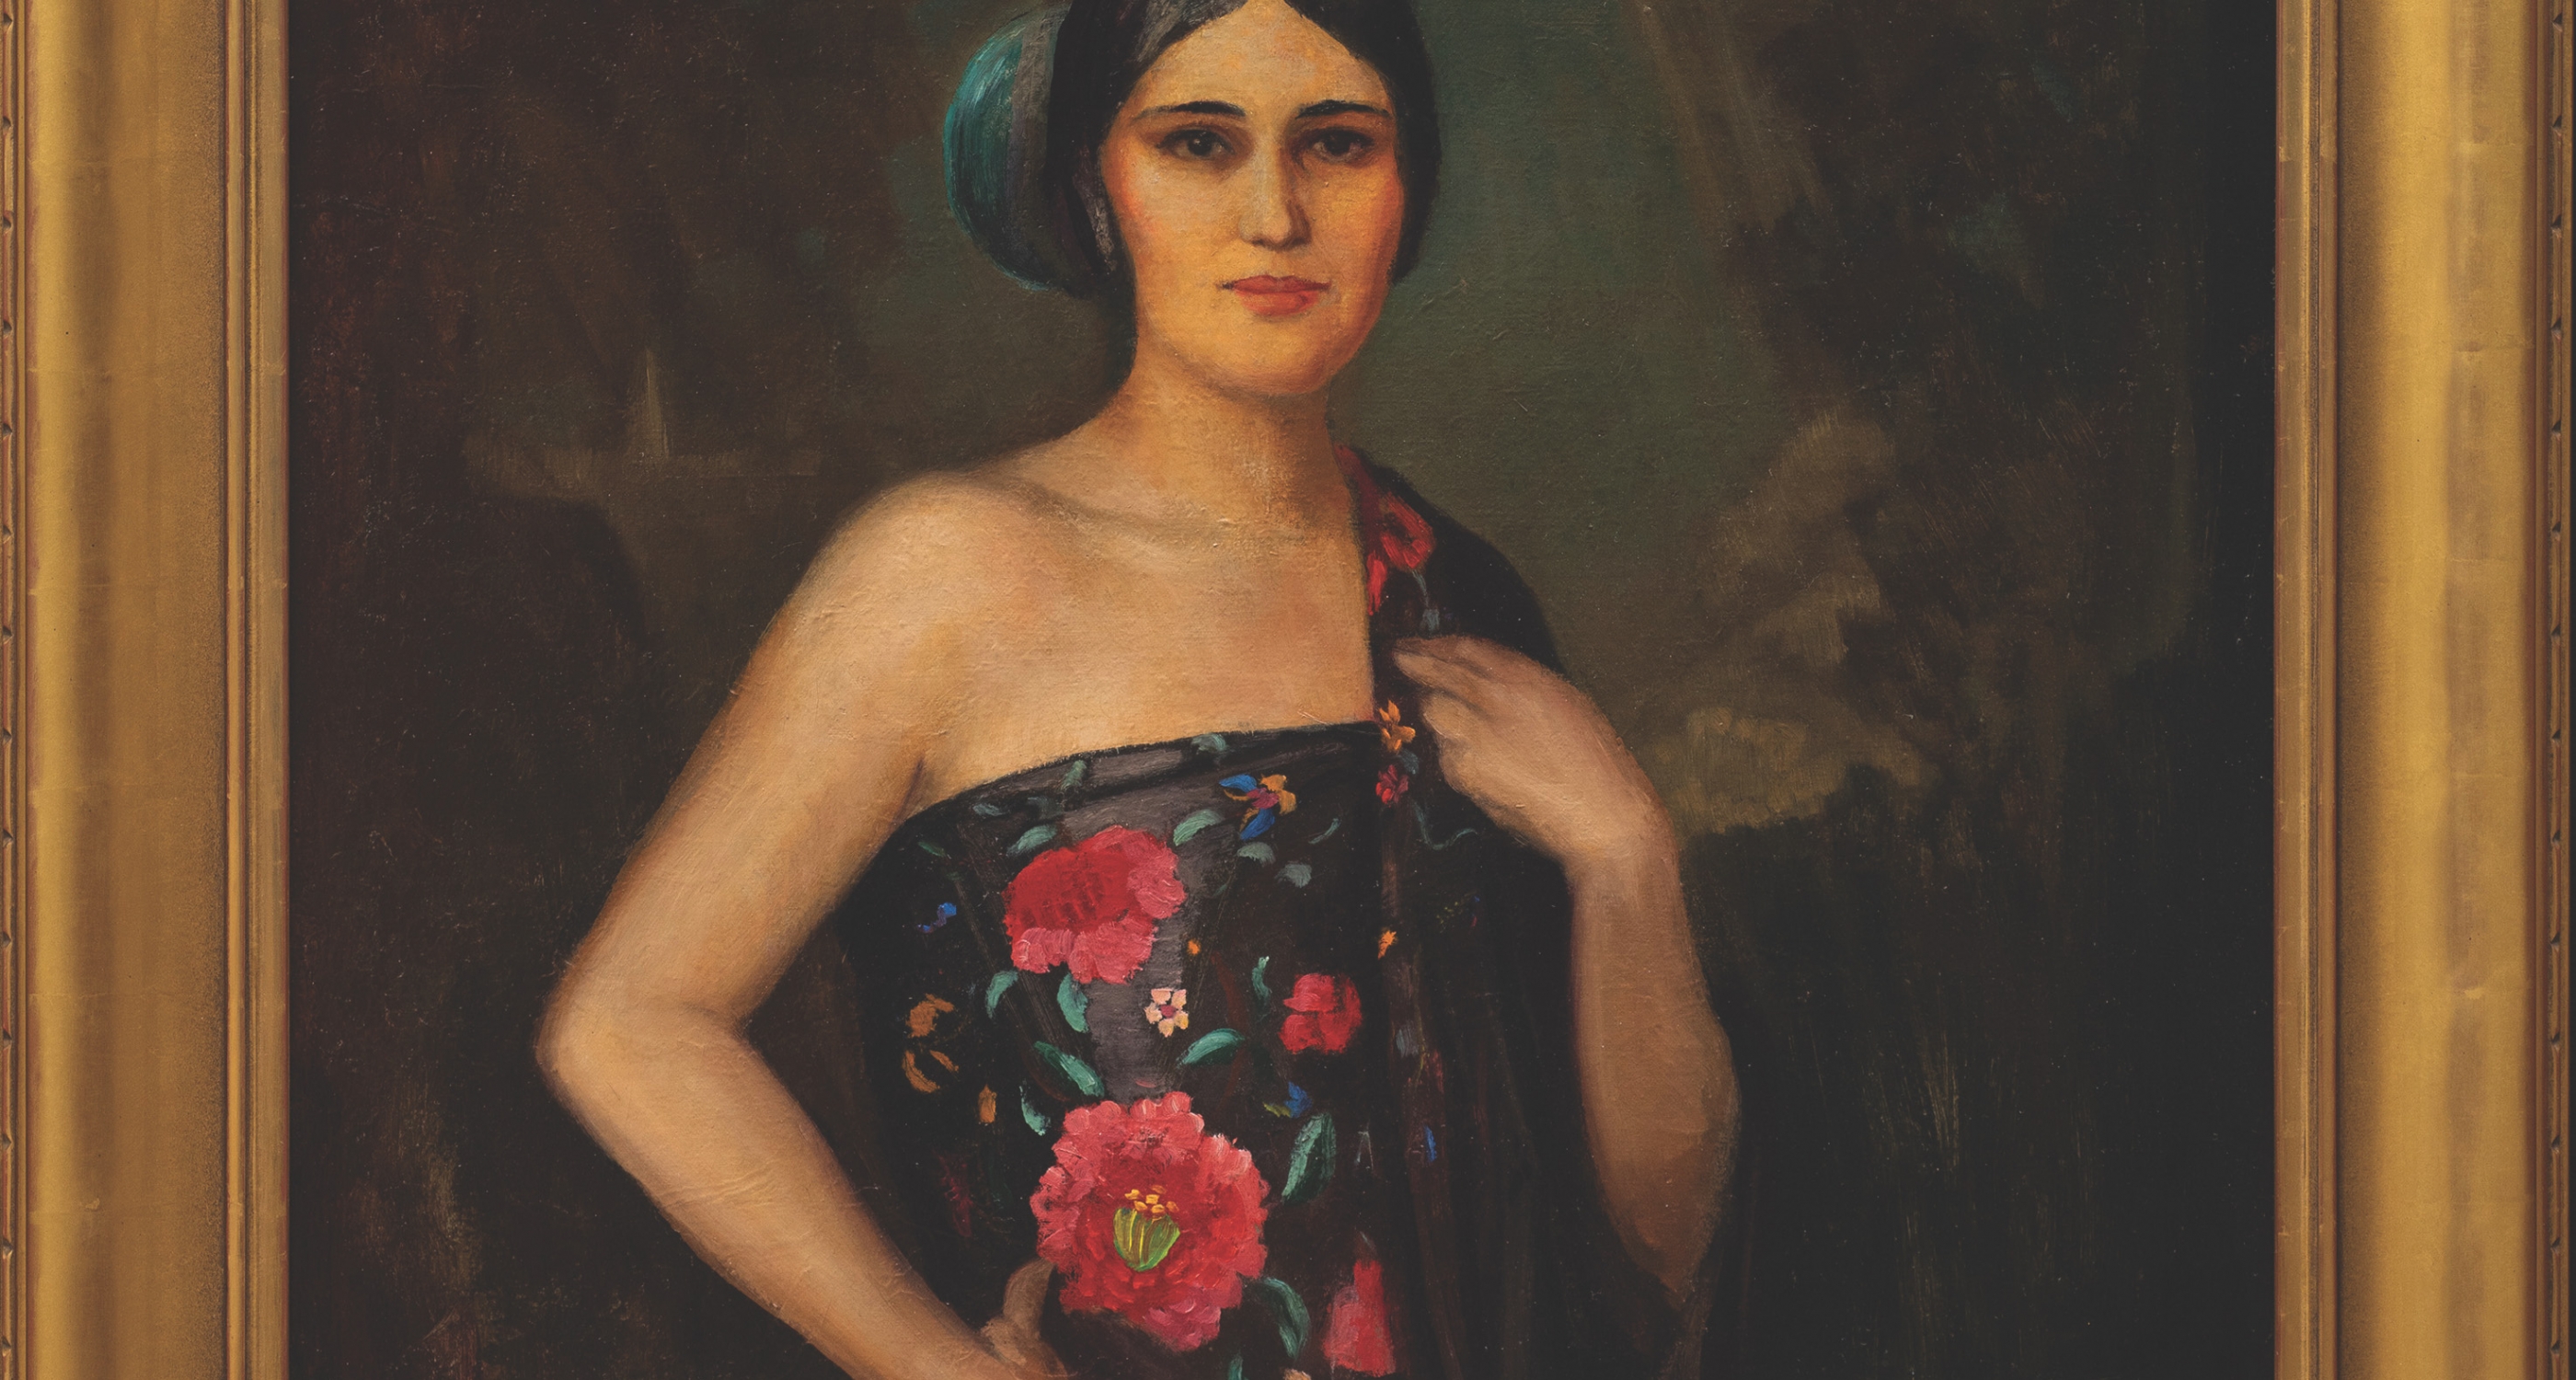 18. Will Shuster (1893–1969) "Laurencita," oil on canvas, 40 x 30 inches